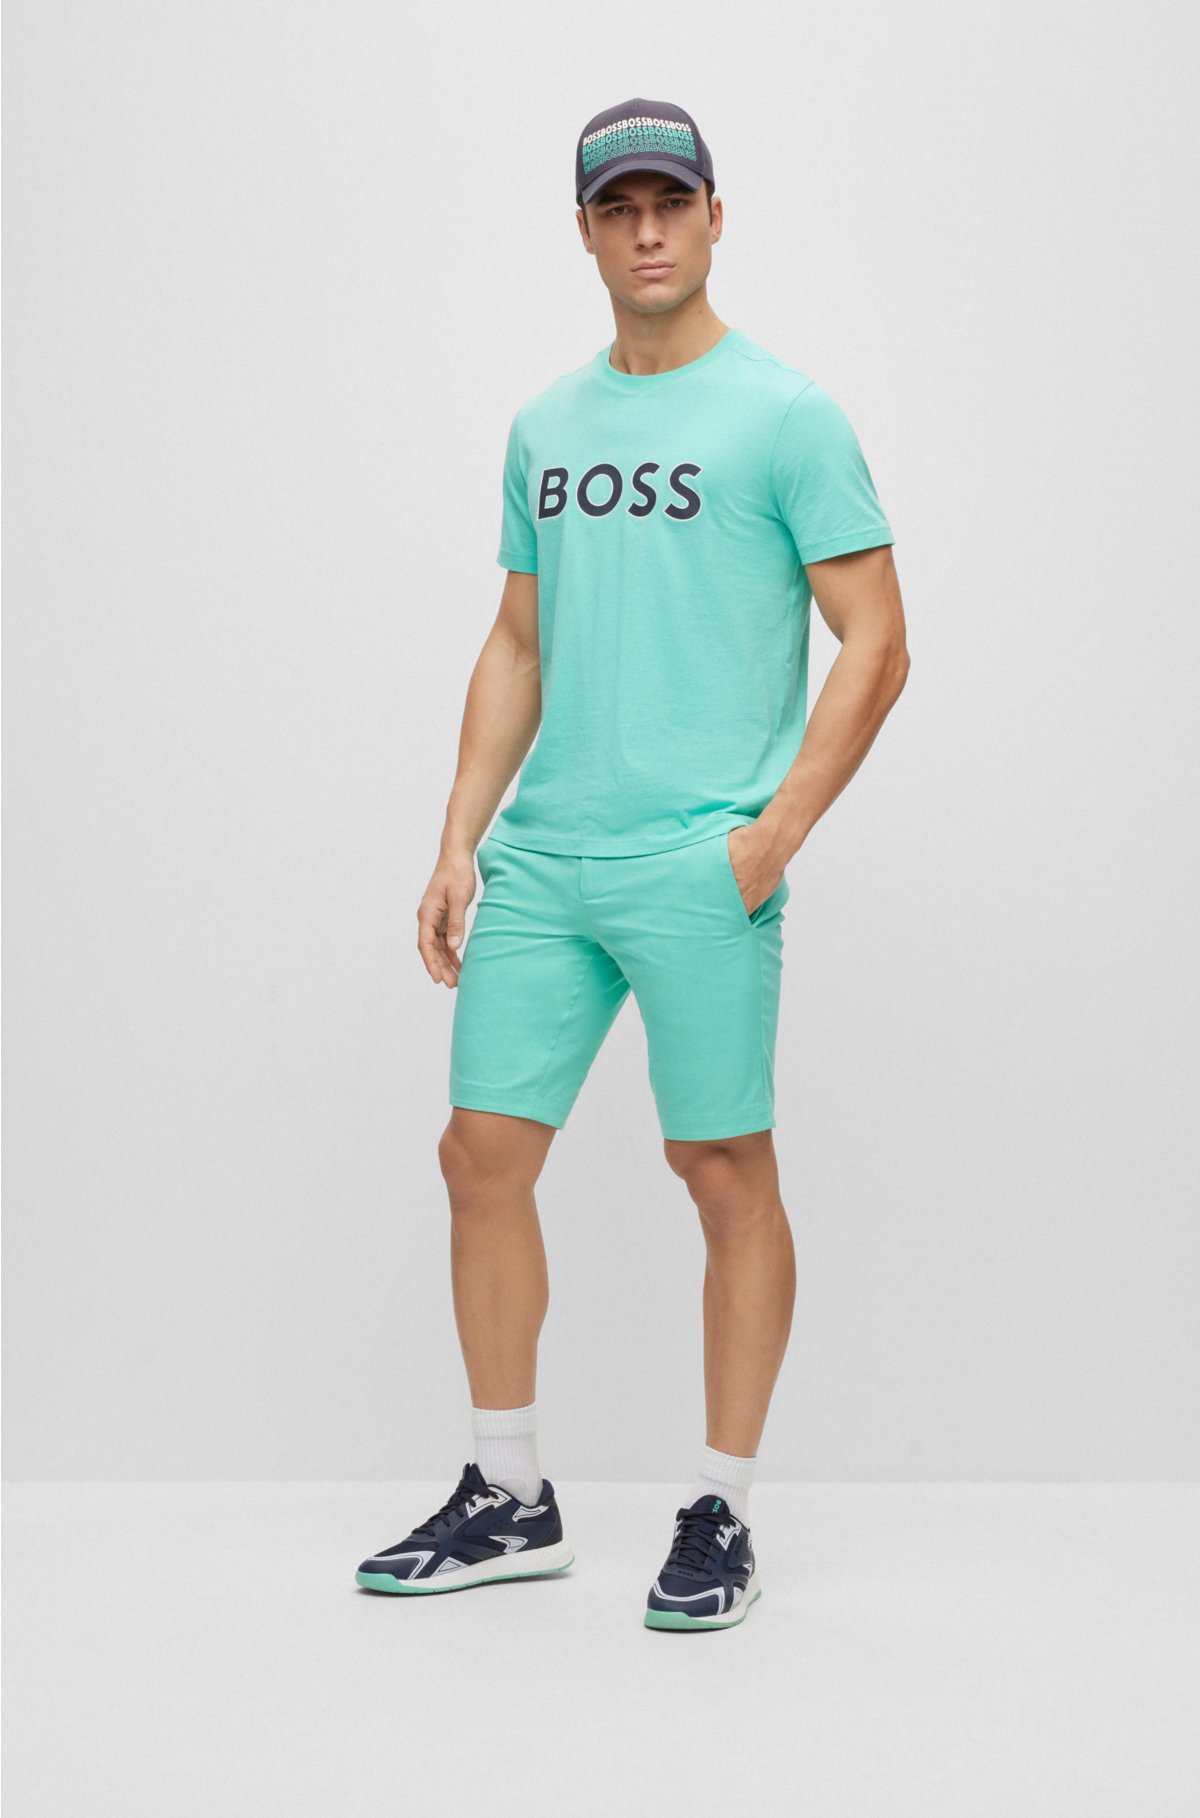 in with logo - jersey BOSS T-shirt print cotton Crew-neck